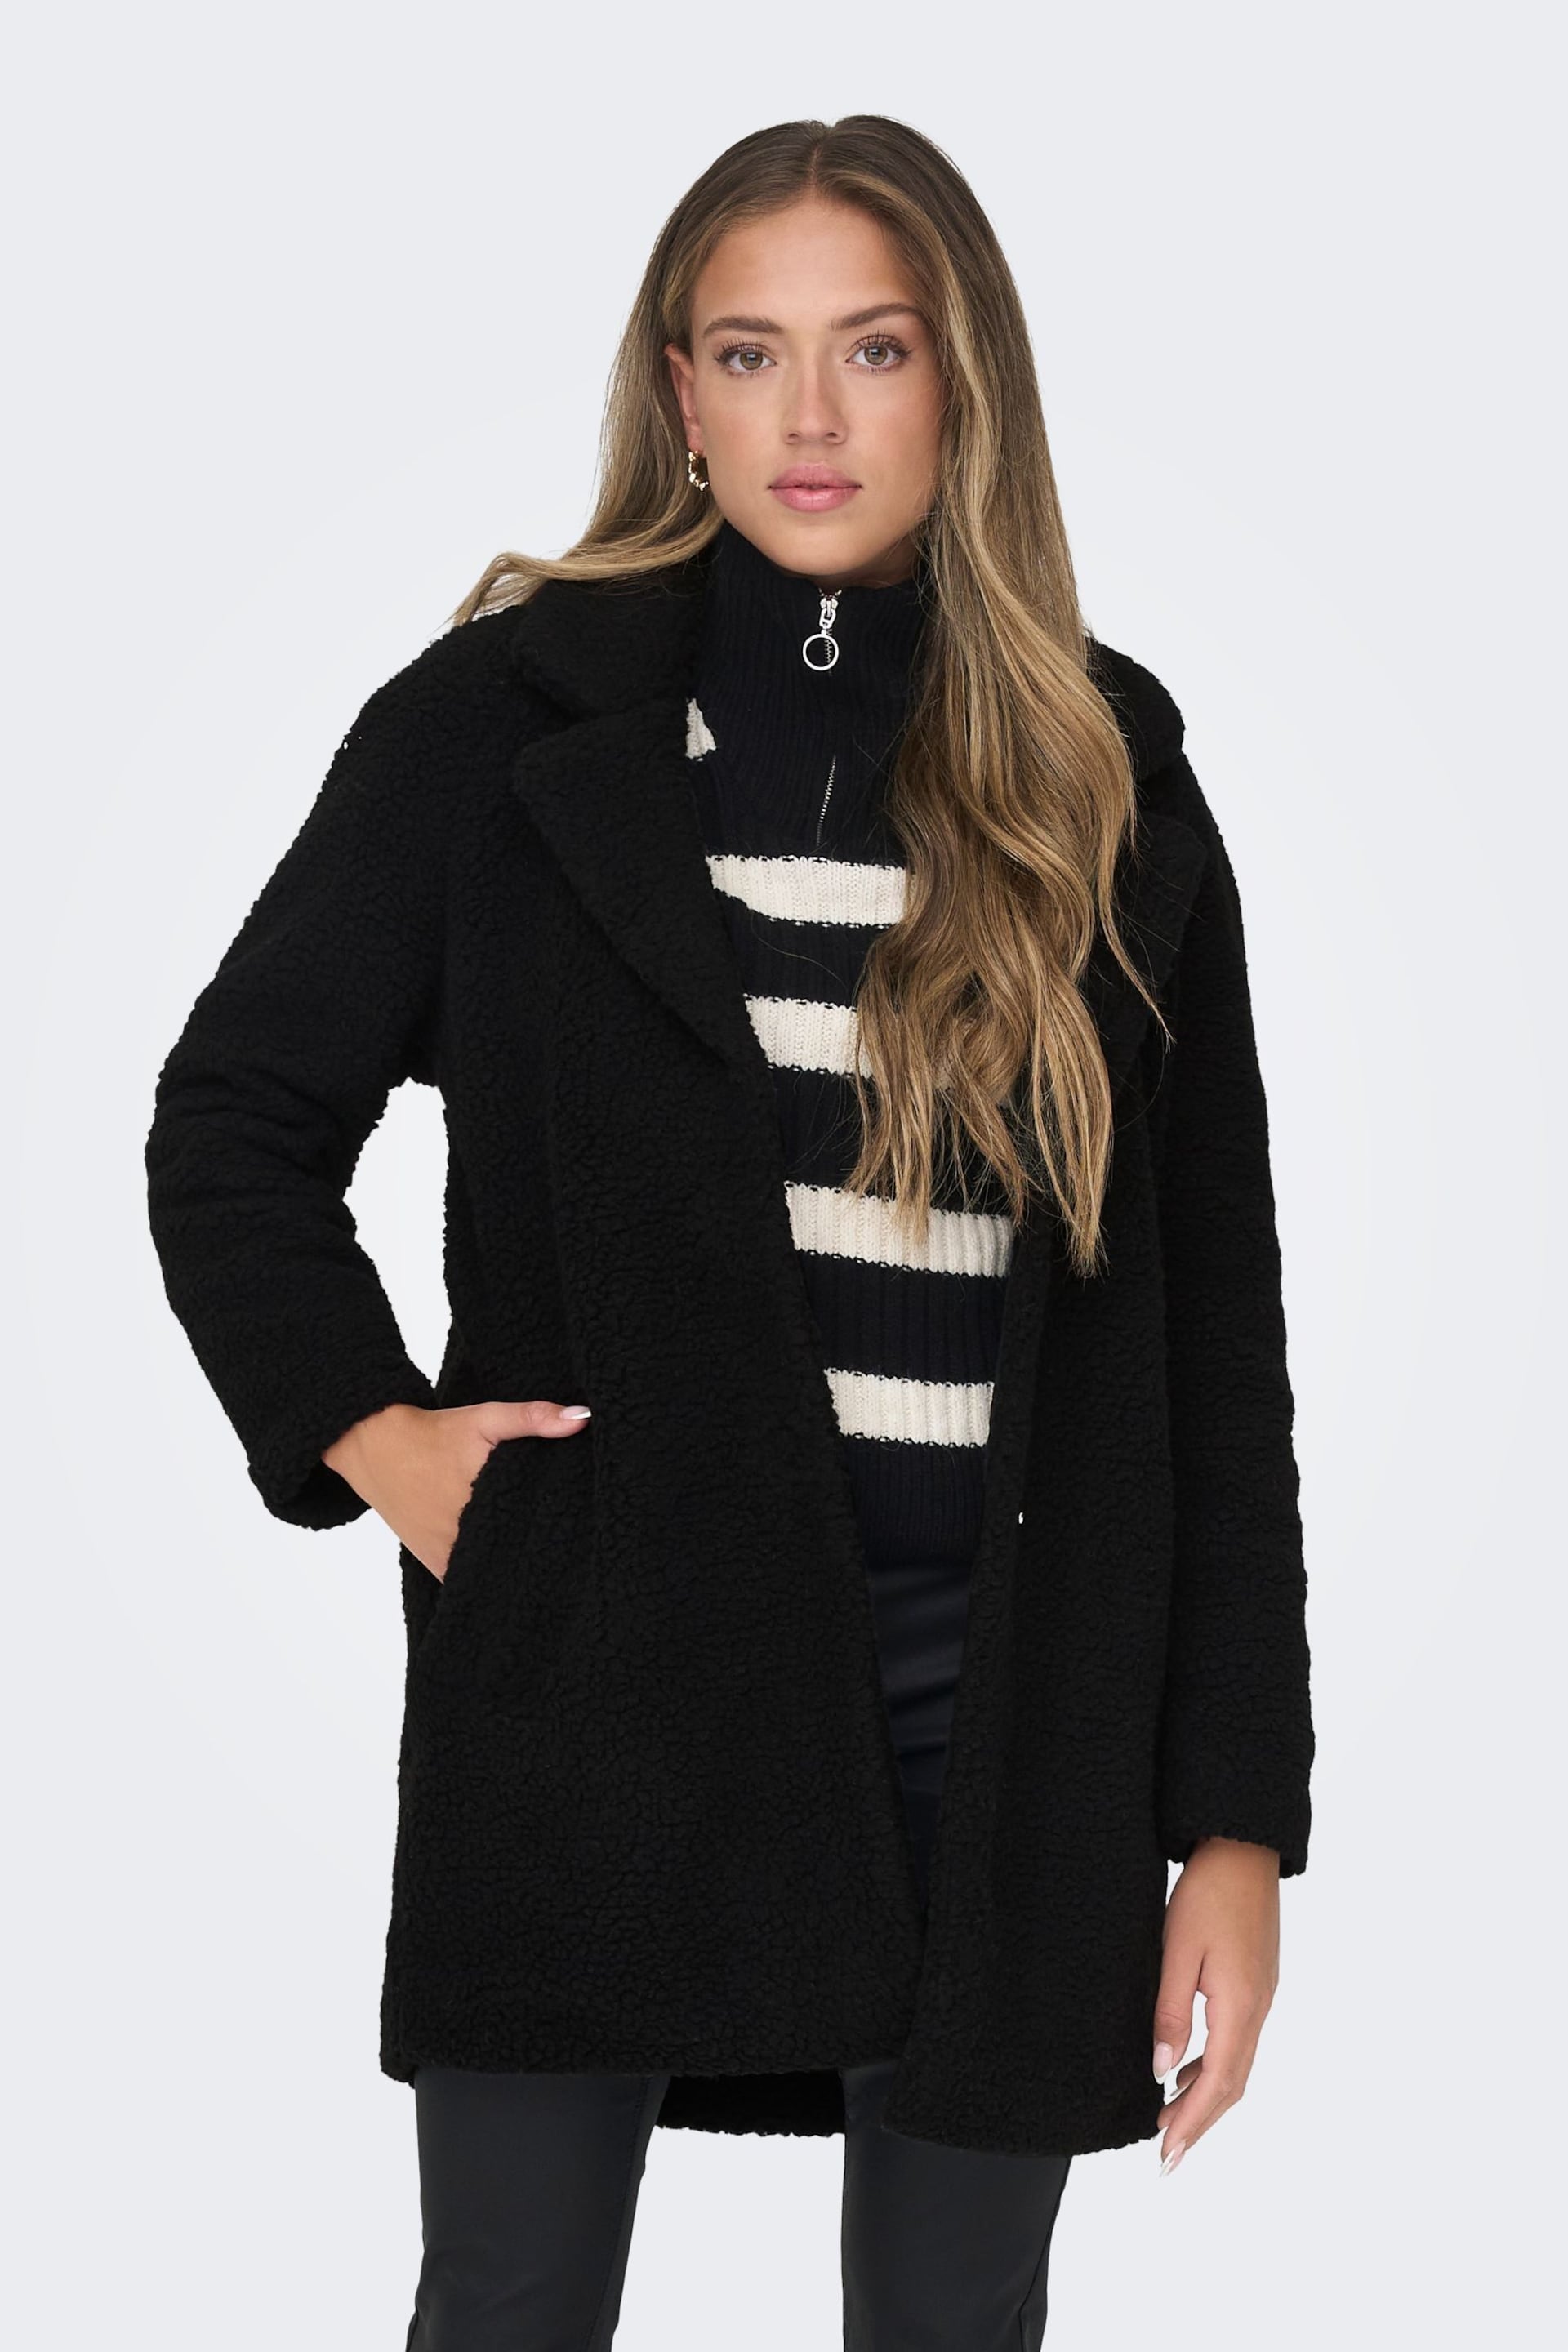 ONLY Black Tailored Cosy Teddy Borg Coat - Image 1 of 5